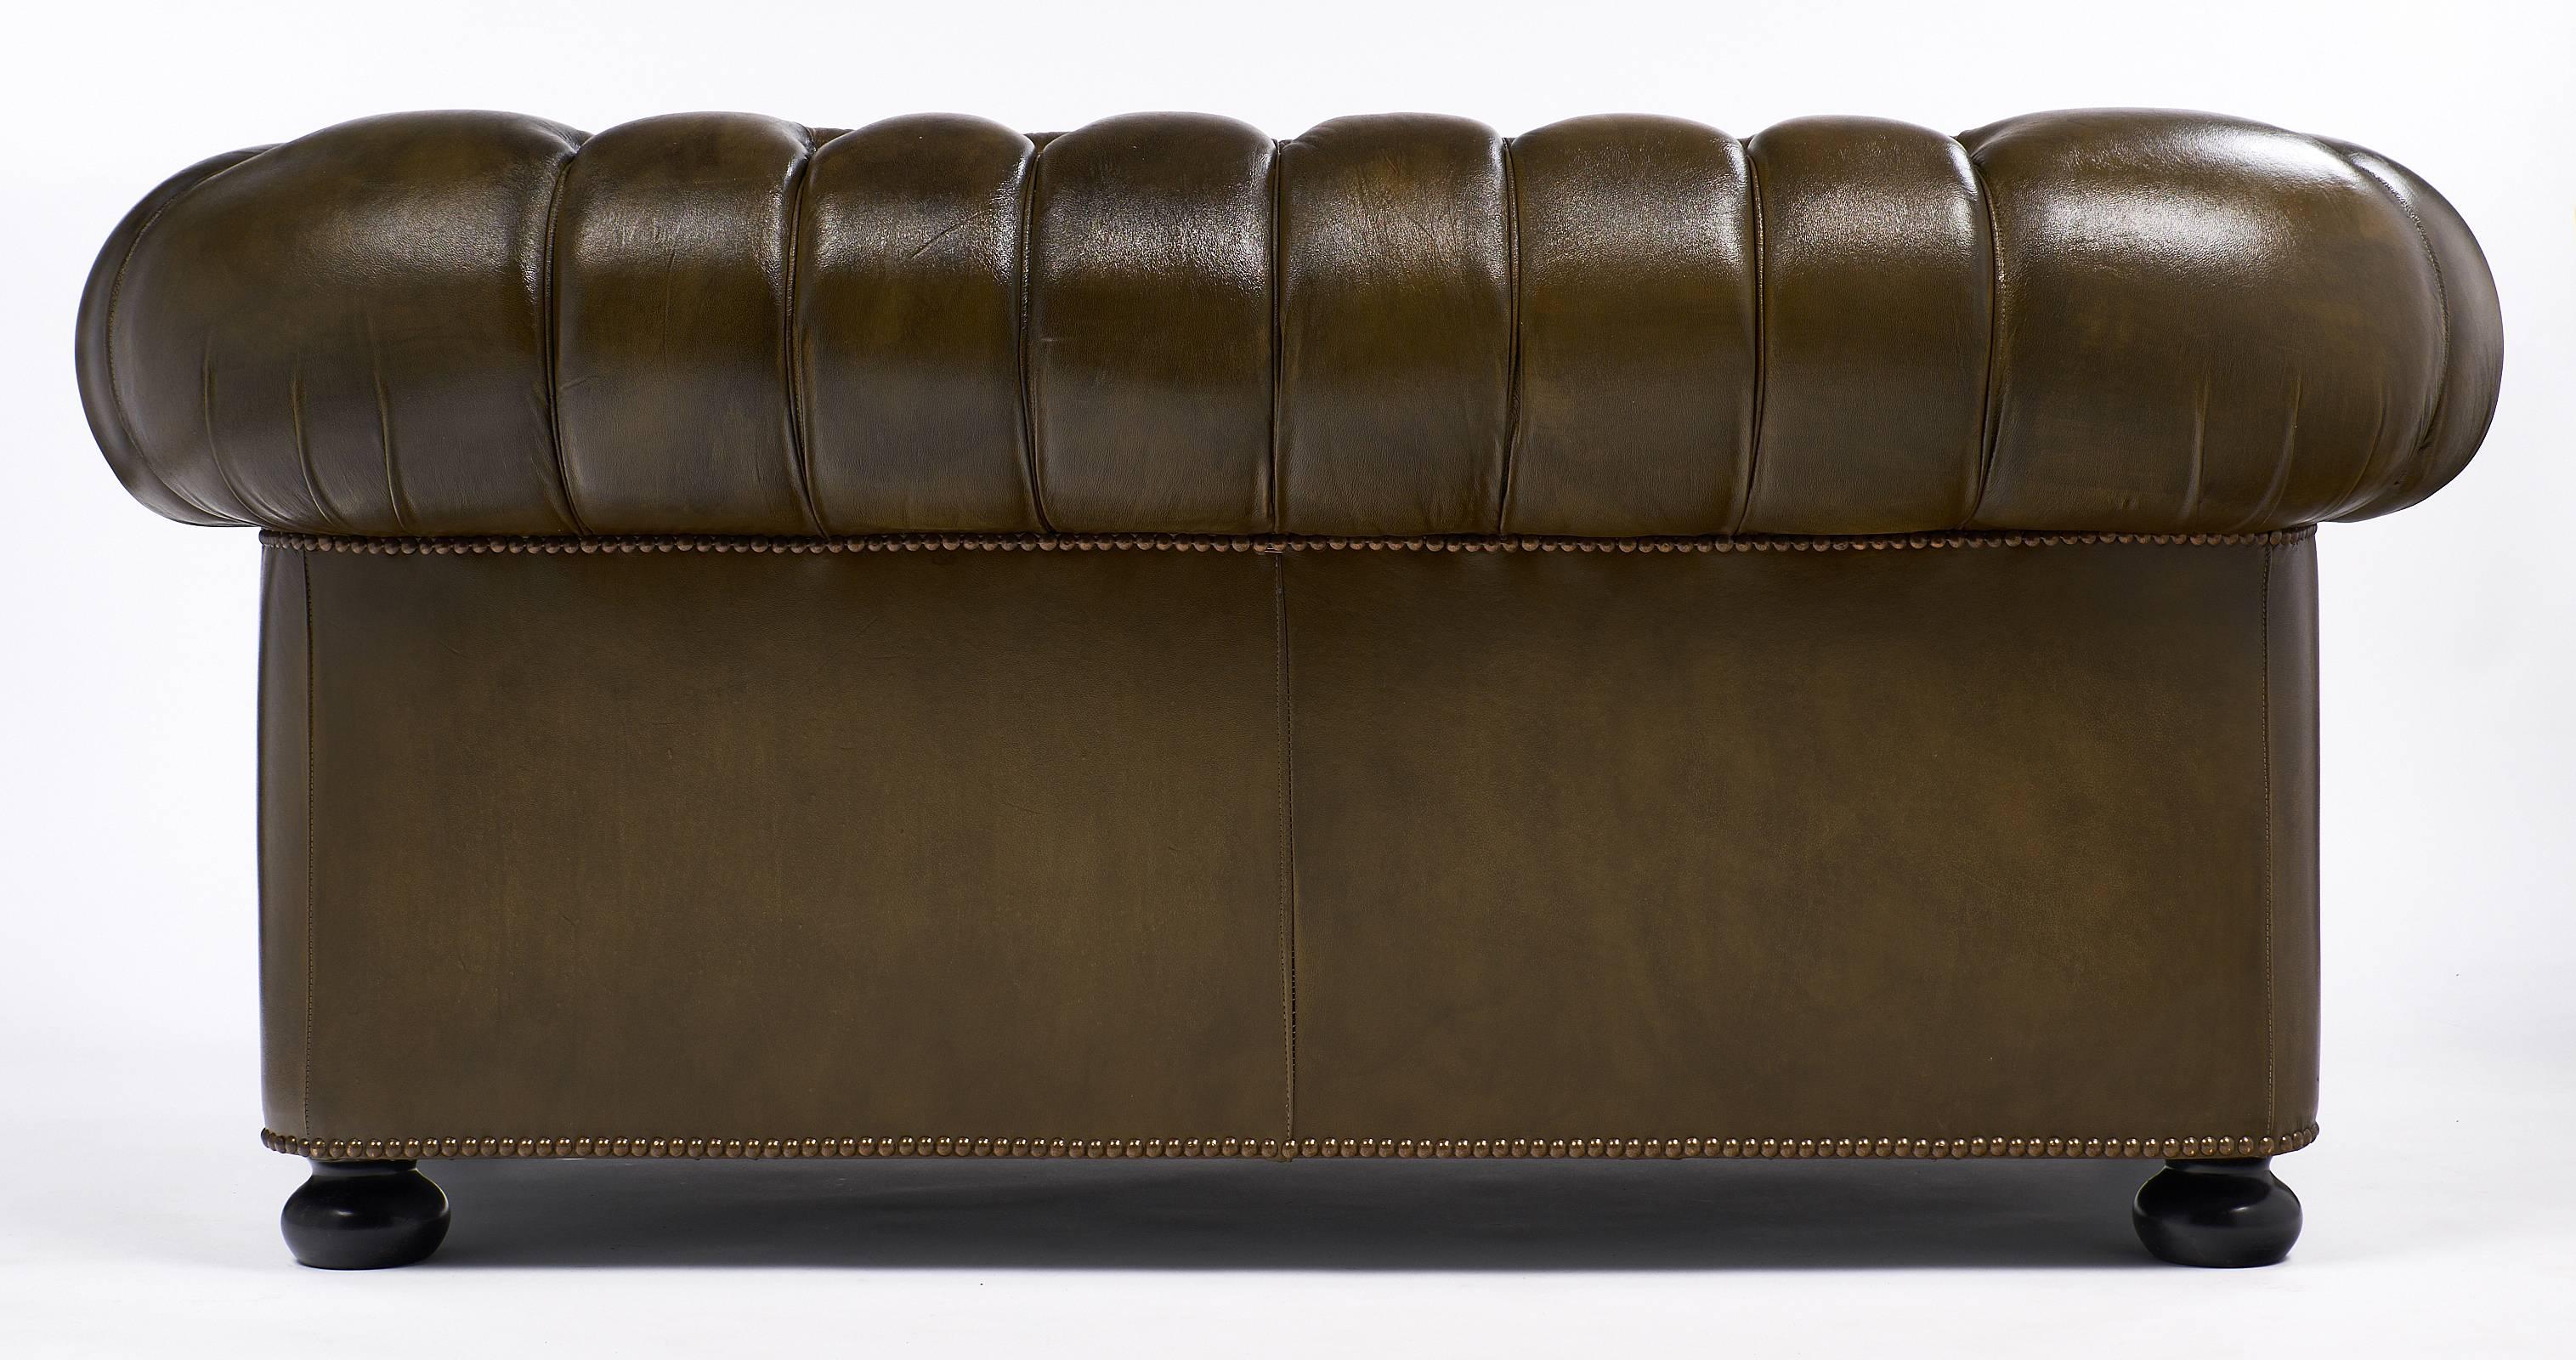 English Vintage Chesterfield Leather Sofa 3